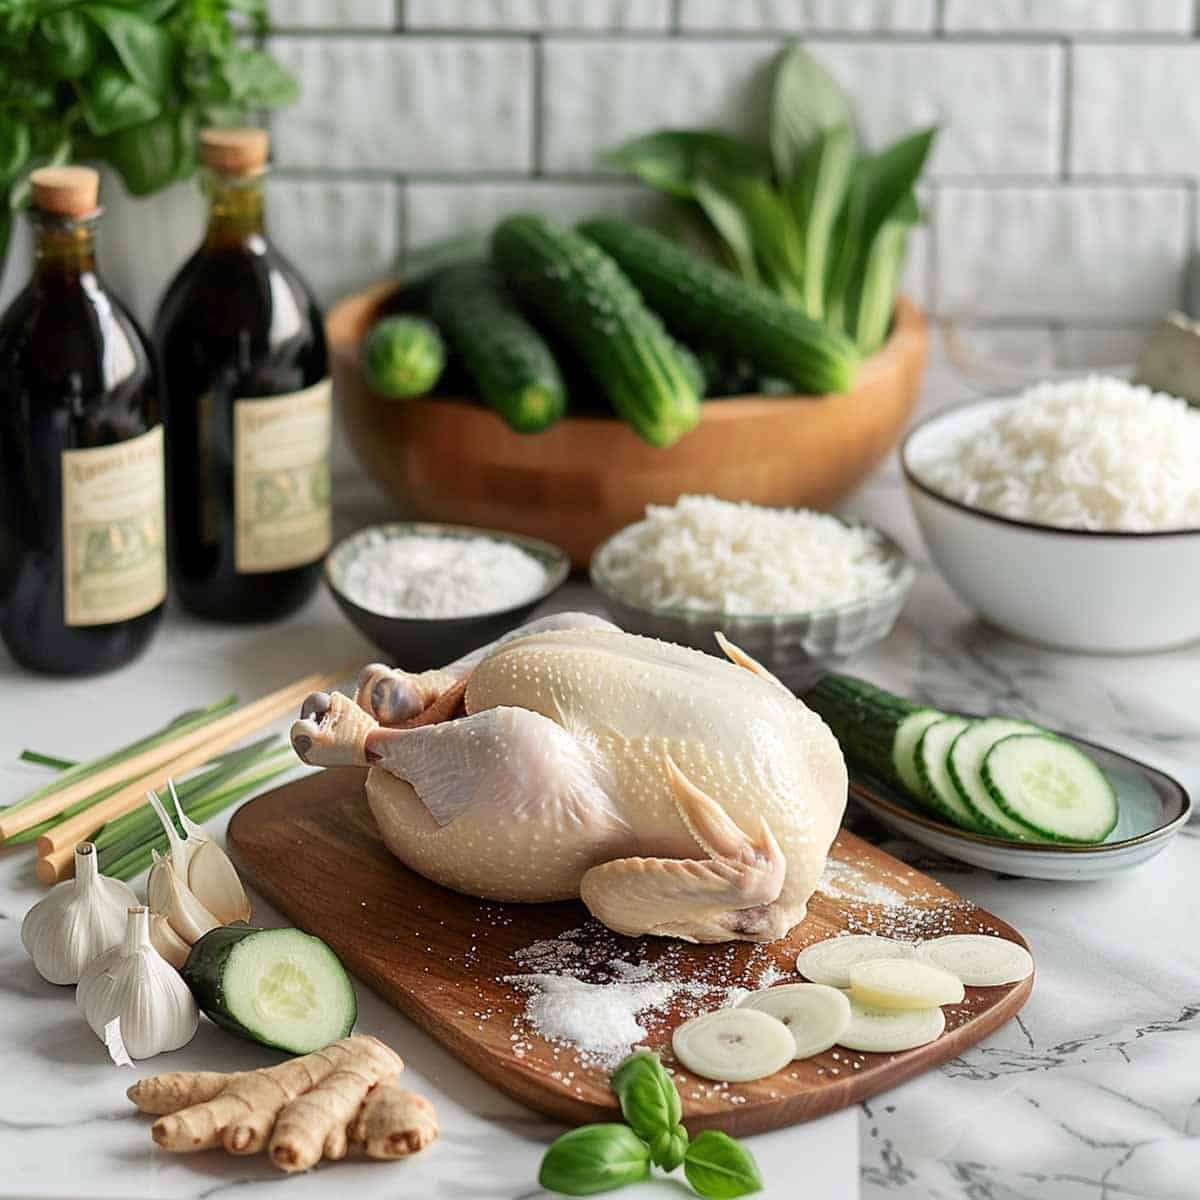 Whole chicken on a cutting board surrounded by ingredients for Khao Man Gai, including rice, cucumber, and sauces.